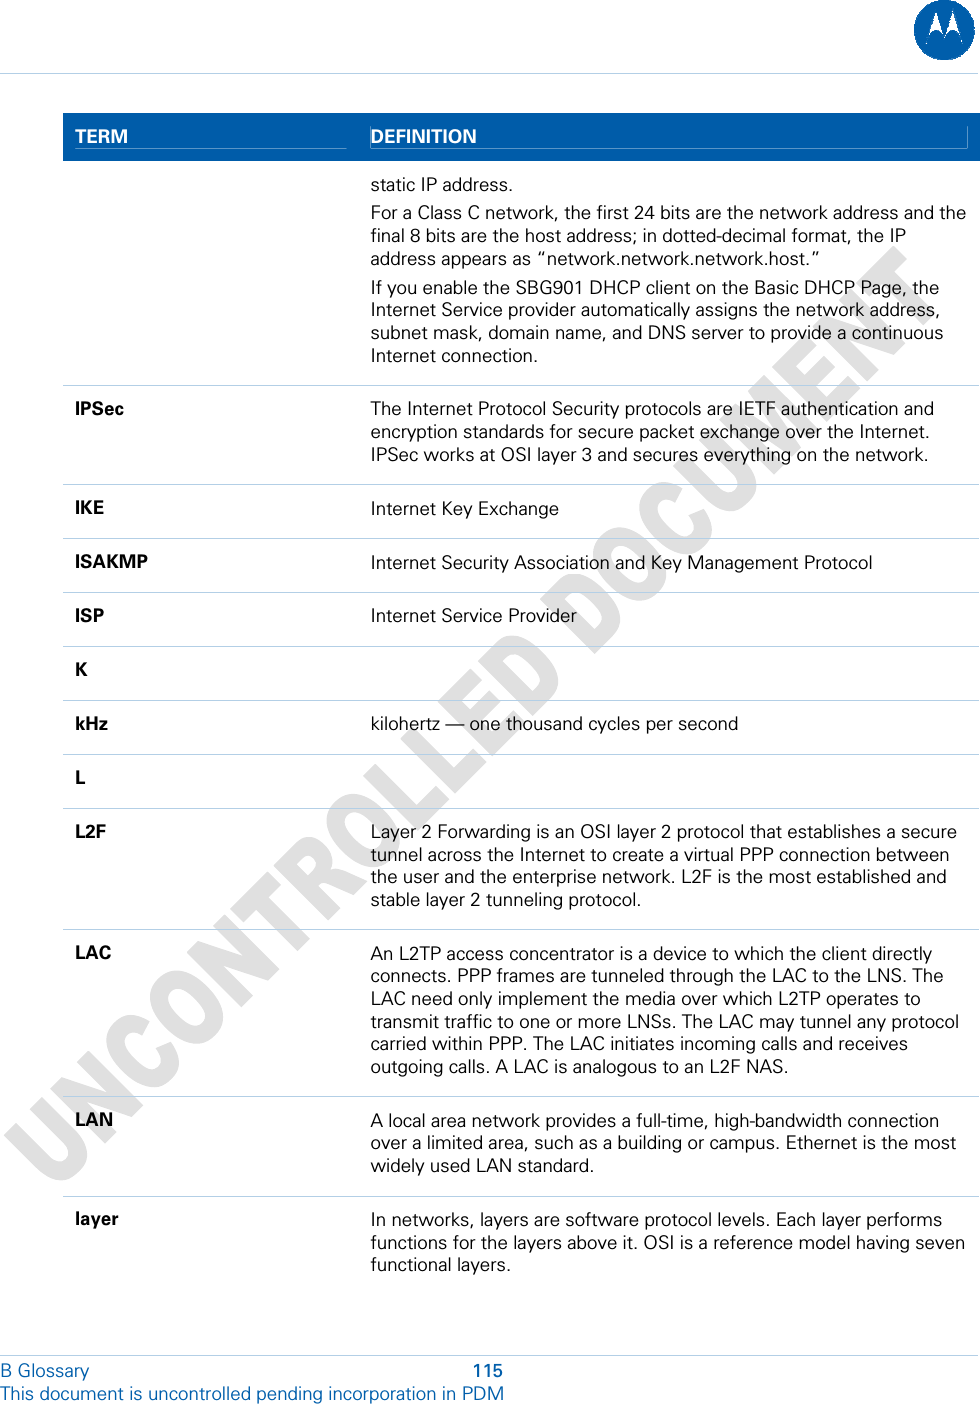  B Glossary  115 This document is uncontrolled pending incorporation in PDM  TERM  DEFINITION static IP address. For a Class C network, the first 24 bits are the network address and the final 8 bits are the host address; in dotted-decimal format, the IP address appears as “network.network.network.host.” If you enable the SBG901 DHCP client on the Basic DHCP Page, the Internet Service provider automatically assigns the network address, subnet mask, domain name, and DNS server to provide a continuous Internet connection. IPSec  The Internet Protocol Security protocols are IETF authentication and encryption standards for secure packet exchange over the Internet. IPSec works at OSI layer 3 and secures everything on the network. IKE  Internet Key Exchange ISAKMP   Internet Security Association and Key Management Protocol ISP  Internet Service Provider K   kHz  kilohertz — one thousand cycles per second L   L2F  Layer 2 Forwarding is an OSI layer 2 protocol that establishes a secure tunnel across the Internet to create a virtual PPP connection between the user and the enterprise network. L2F is the most established and stable layer 2 tunneling protocol. LAC  An L2TP access concentrator is a device to which the client directly connects. PPP frames are tunneled through the LAC to the LNS. The LAC need only implement the media over which L2TP operates to transmit traffic to one or more LNSs. The LAC may tunnel any protocol carried within PPP. The LAC initiates incoming calls and receives outgoing calls. A LAC is analogous to an L2F NAS. LAN  A local area network provides a full-time, high-bandwidth connection over a limited area, such as a building or campus. Ethernet is the most widely used LAN standard. layer  In networks, layers are software protocol levels. Each layer performs functions for the layers above it. OSI is a reference model having seven functional layers. 